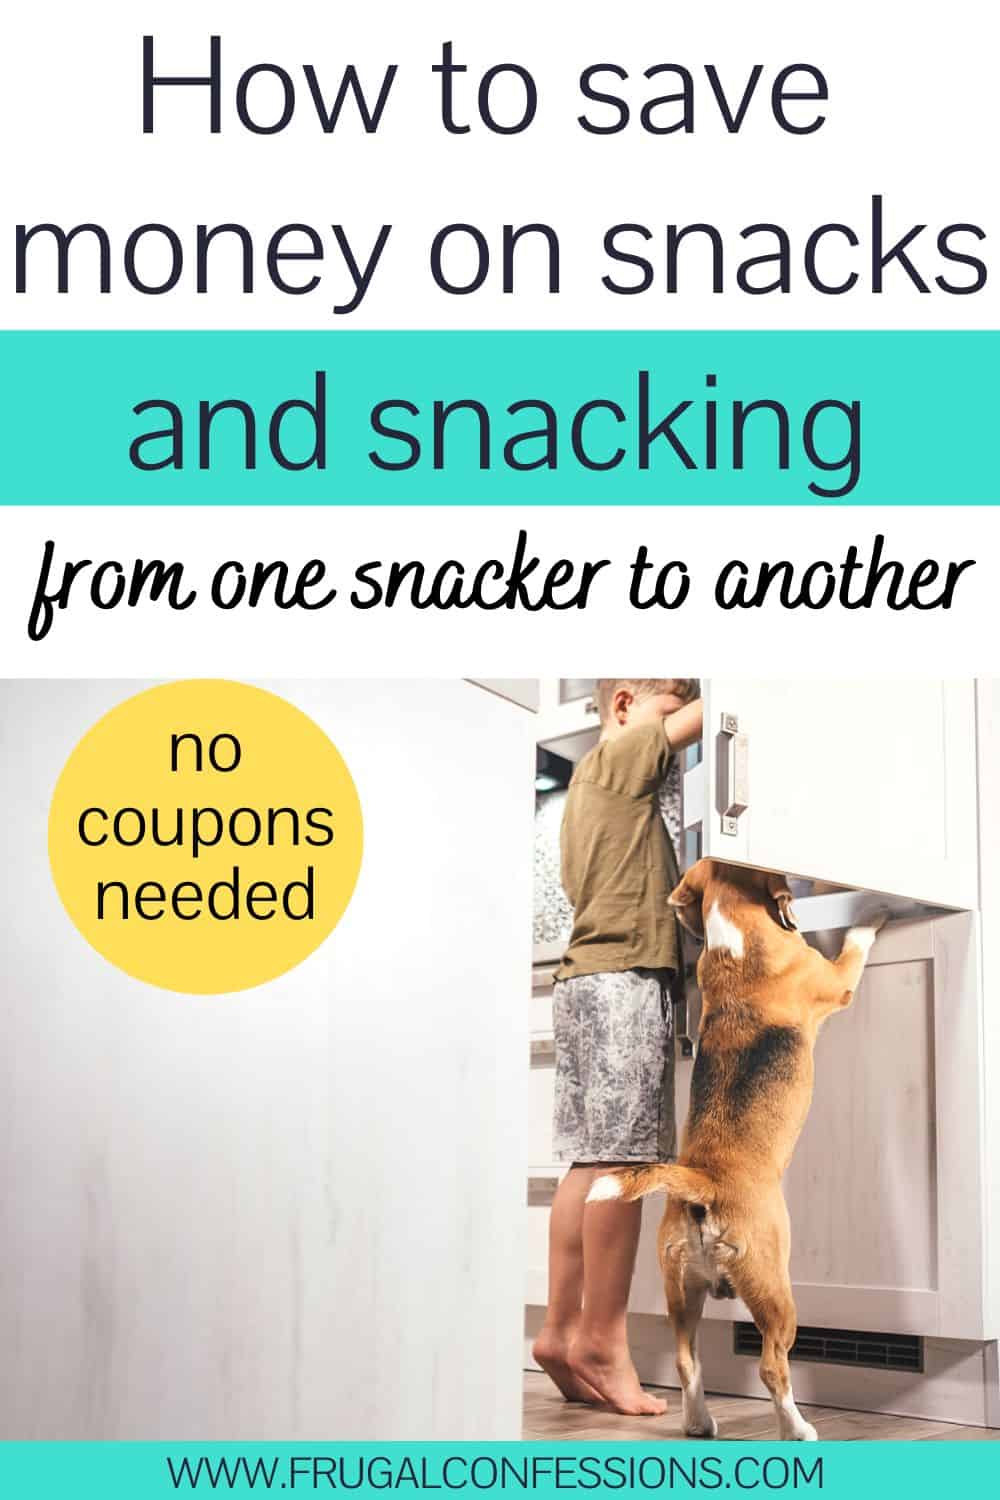 boy with his dog, reaching into snack cupboard, text overlay "how to save money on snacks and snacking"